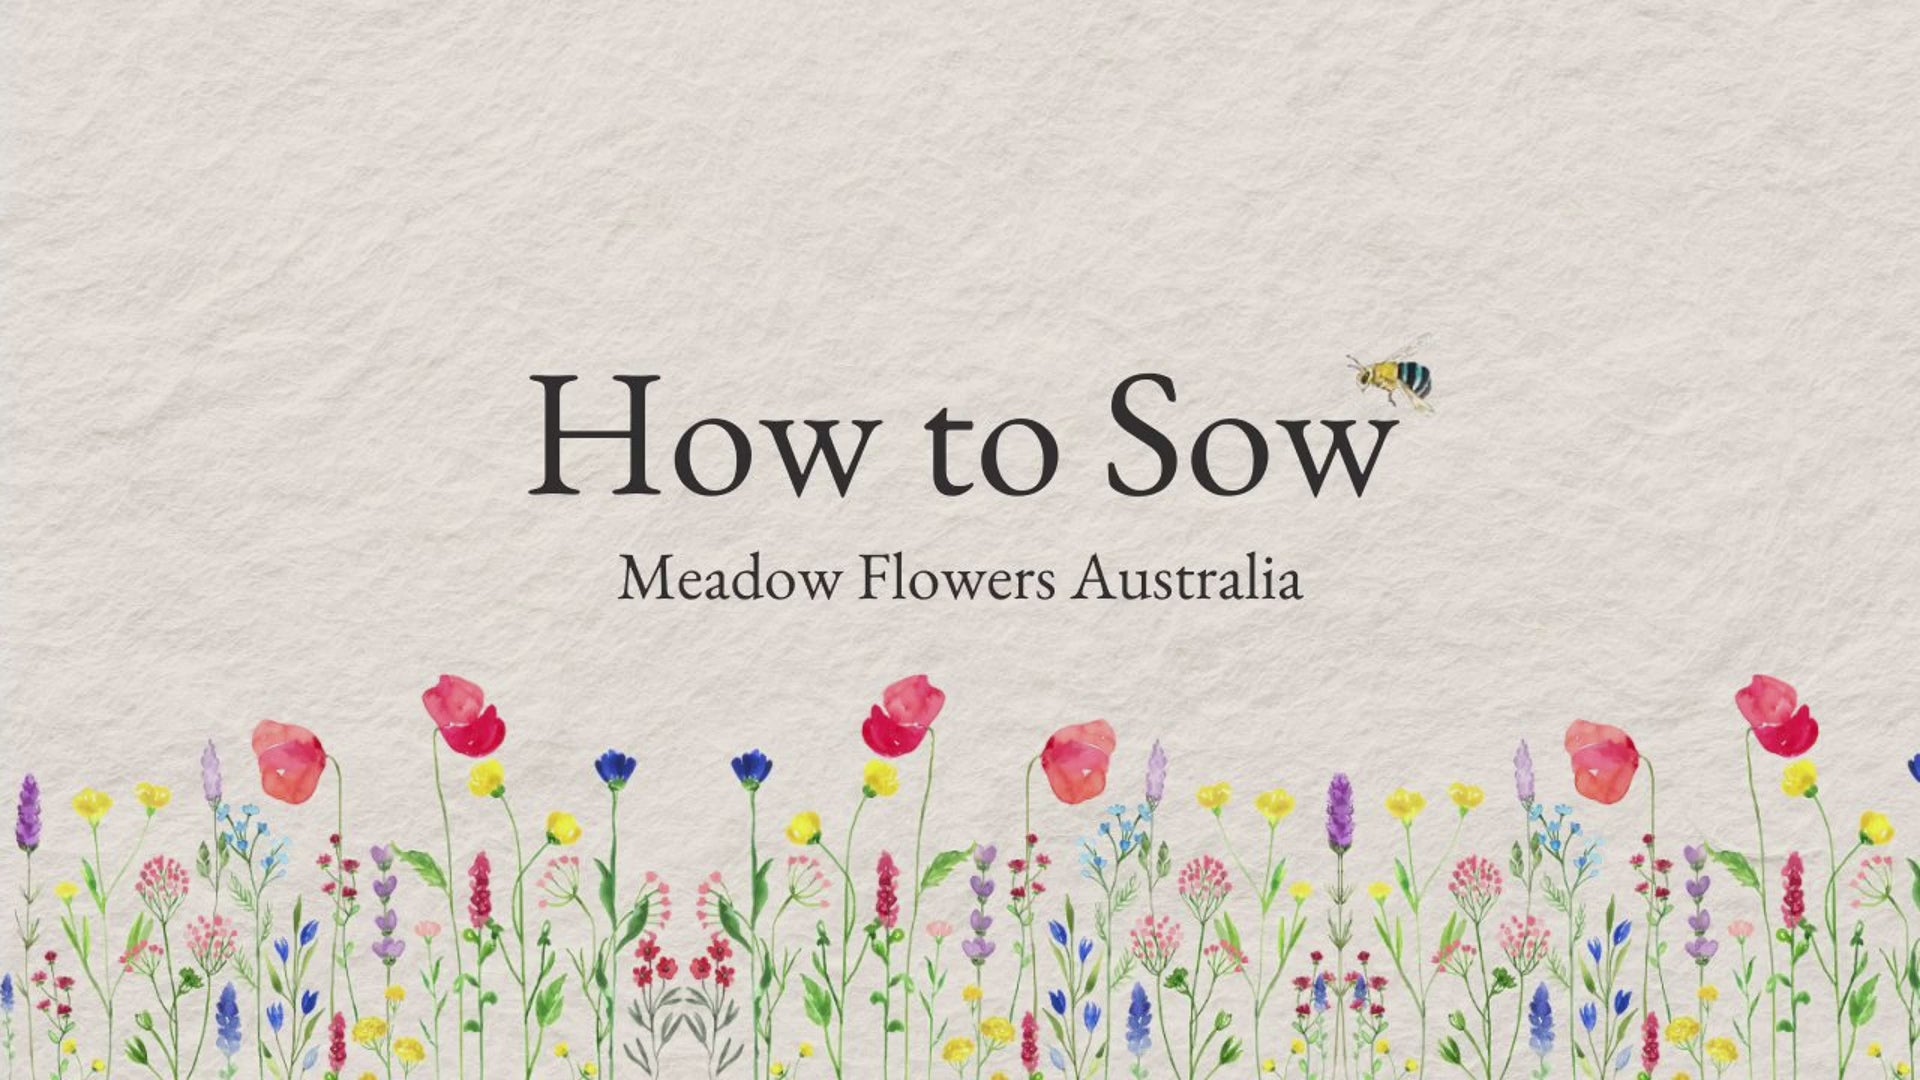 Load video: Video that shows how to show Meadow Flowers seeds